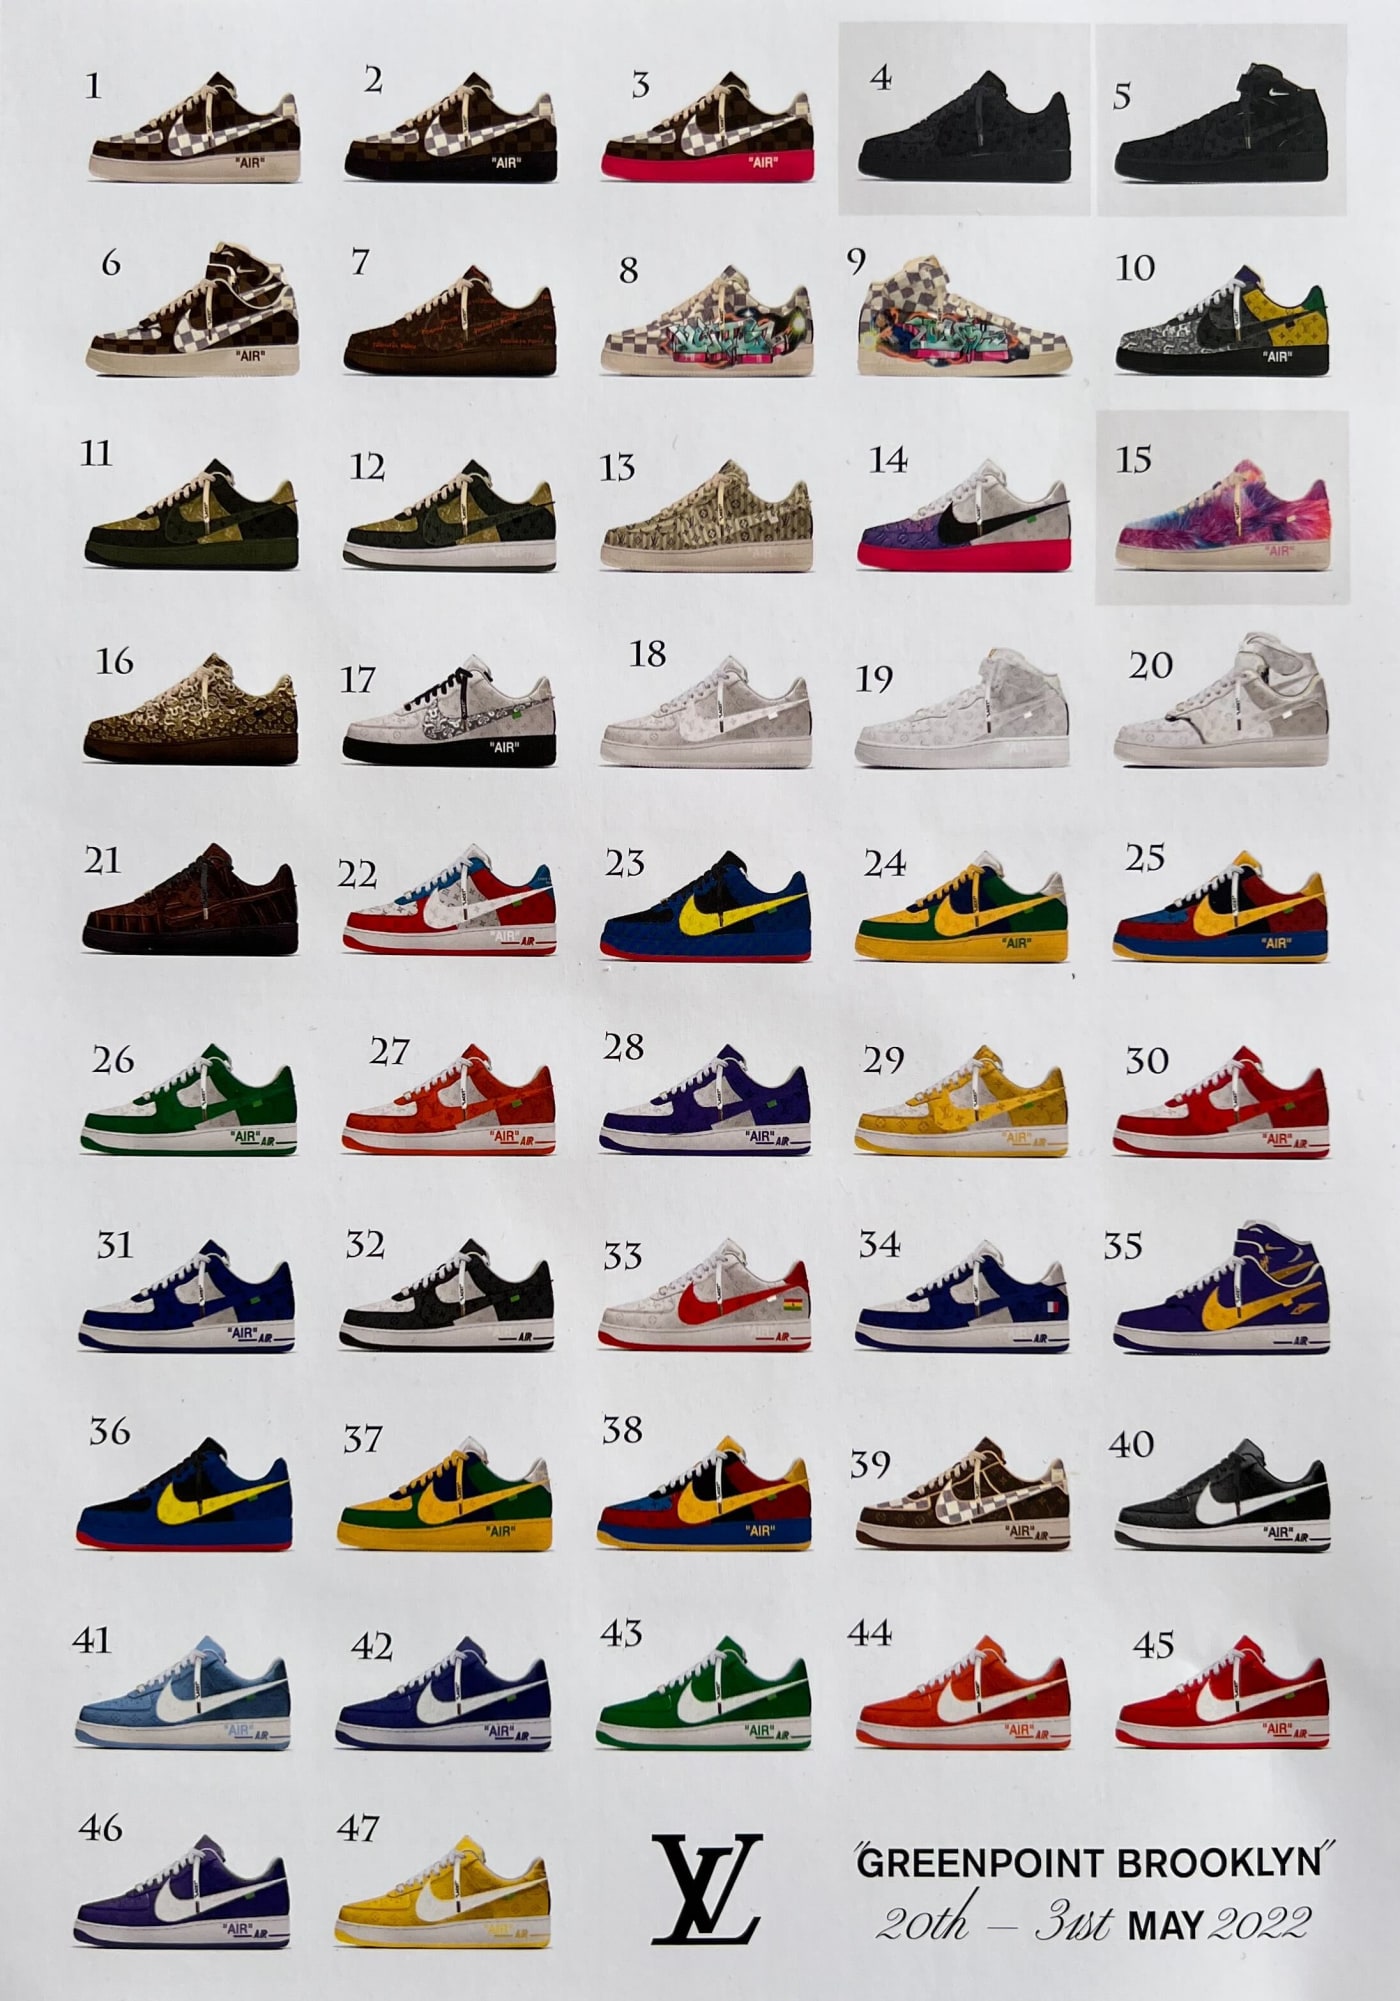 Louis Vuitton x Nike Air 1 Exhibition: All the Shoes Display | Complex